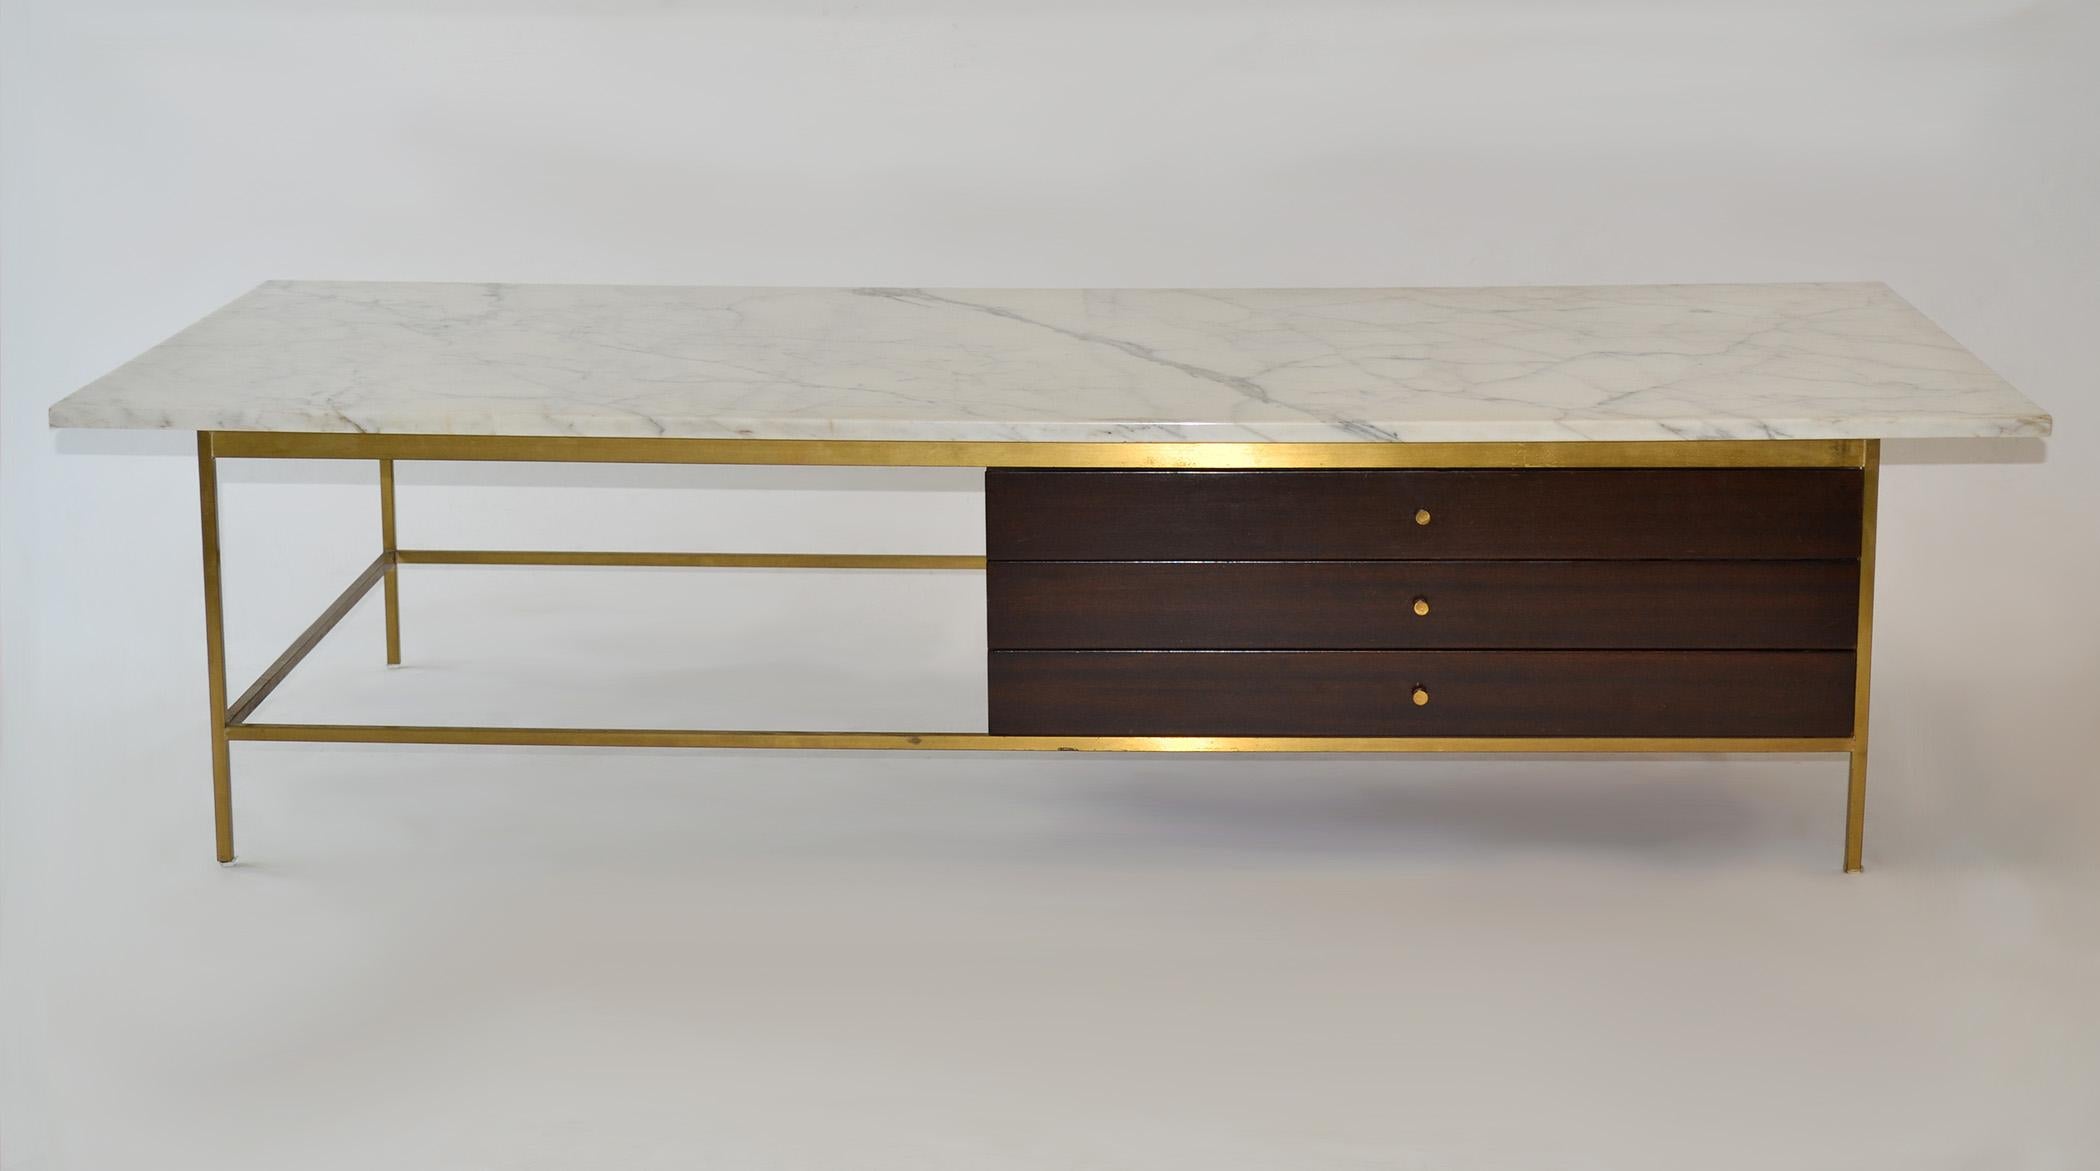 Paul McCobb for Calvin Coffee Table in Marble, Brass and Wood, Mid Century
Large brass-framed, 5/8